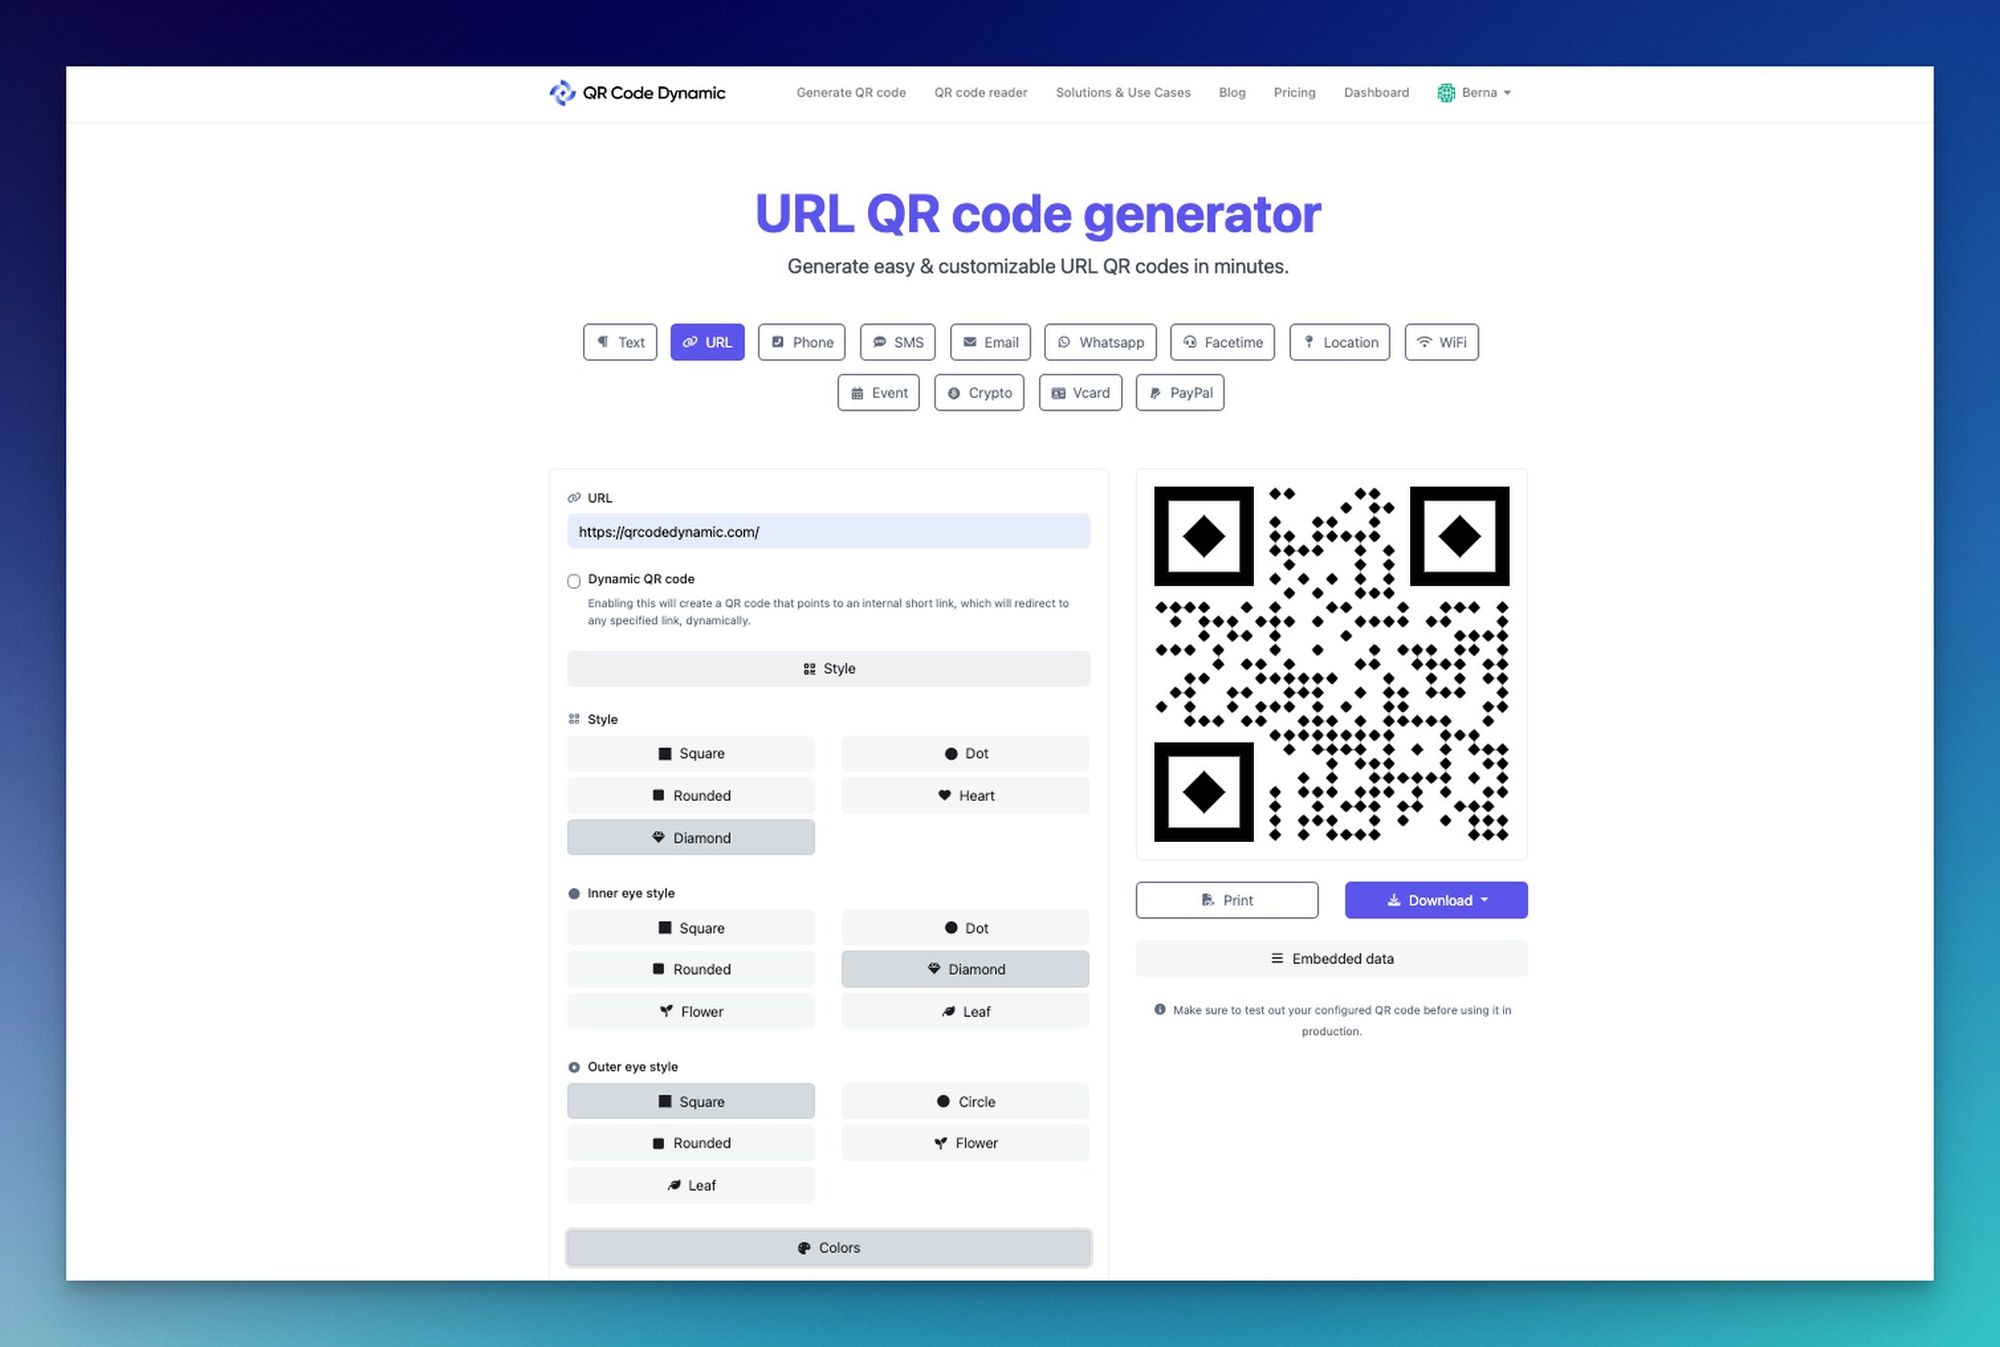 How to Make a Venmo QR Code for Easy Transactions